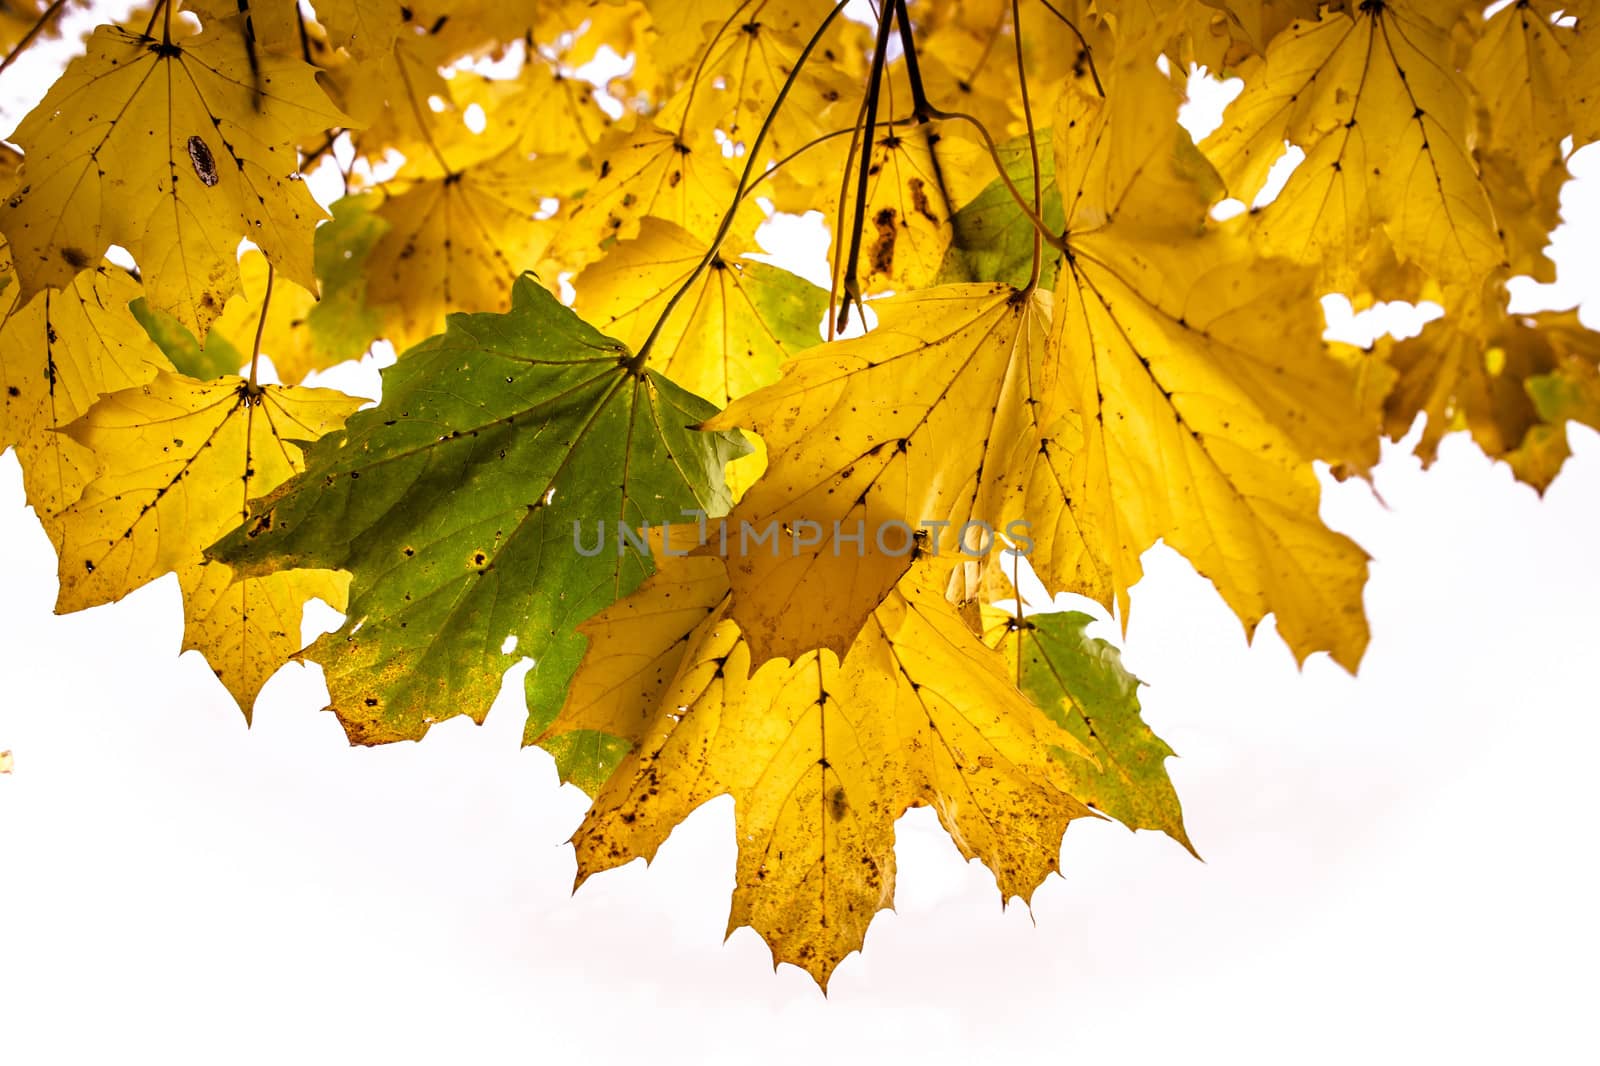 Autumn leafs by Sportactive